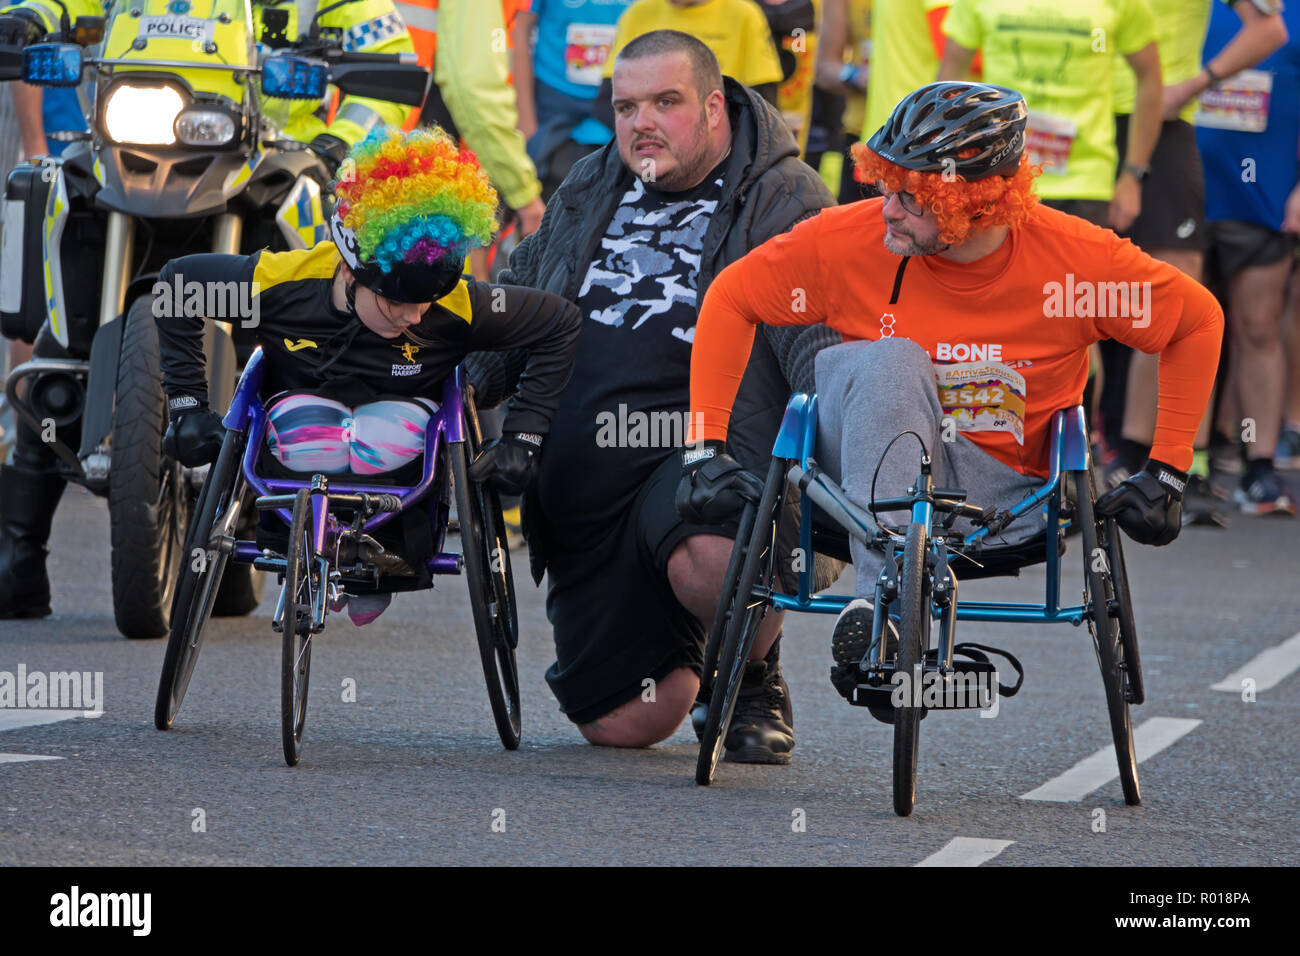 Participants in wheelchairs line up at the start of the Liverpool Scouse 5k run in Liverpool UK 2018. Stock Photo